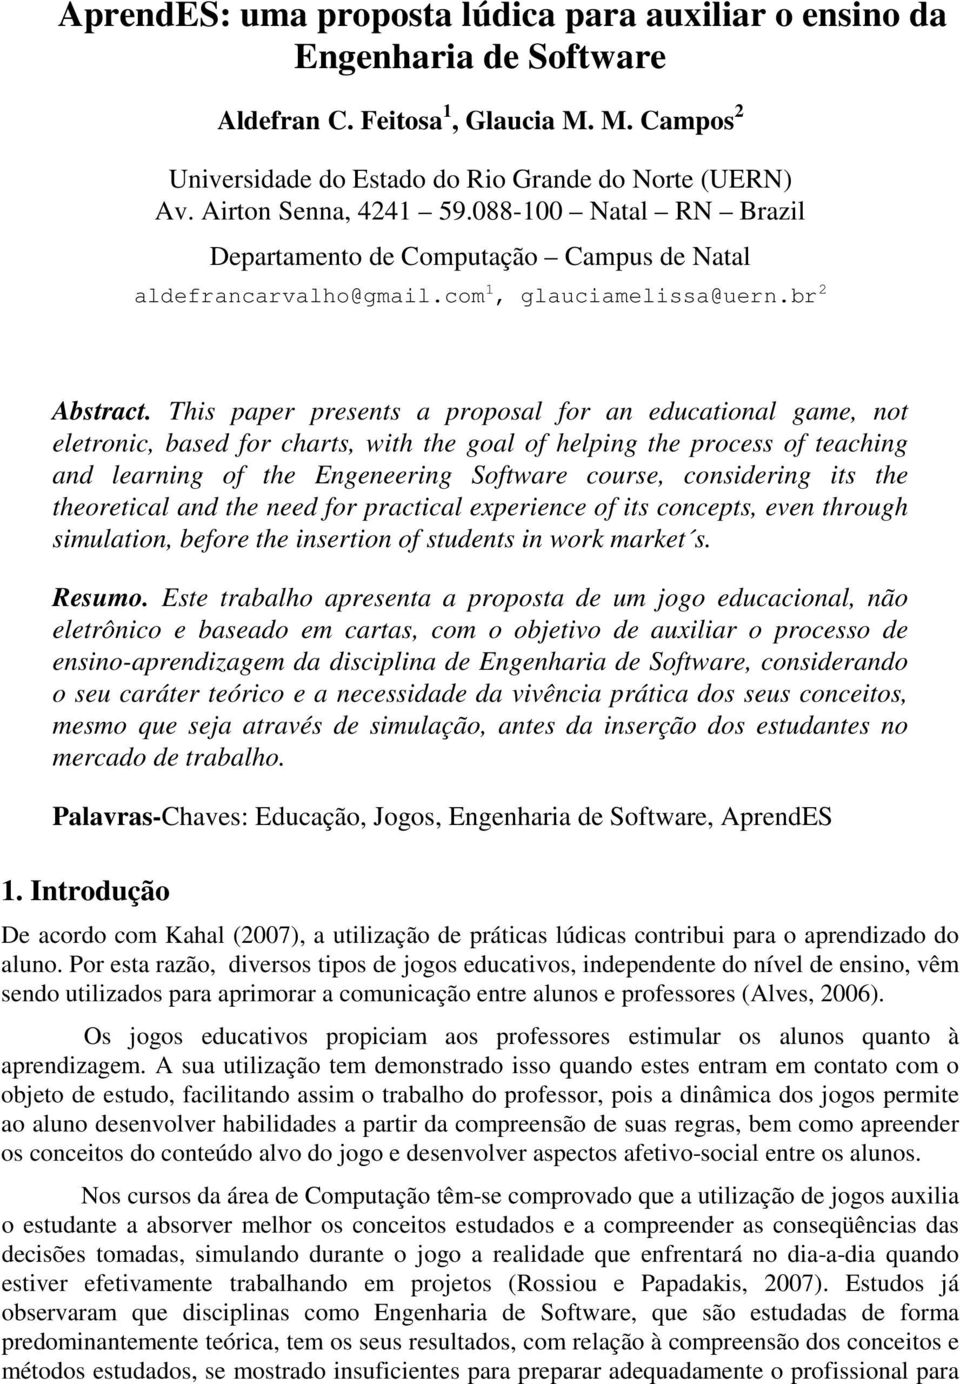 This paper presents a proposal for an educational game, not eletronic, based for charts, with the goal of helping the process of teaching and learning of the Engeneering Software course, considering